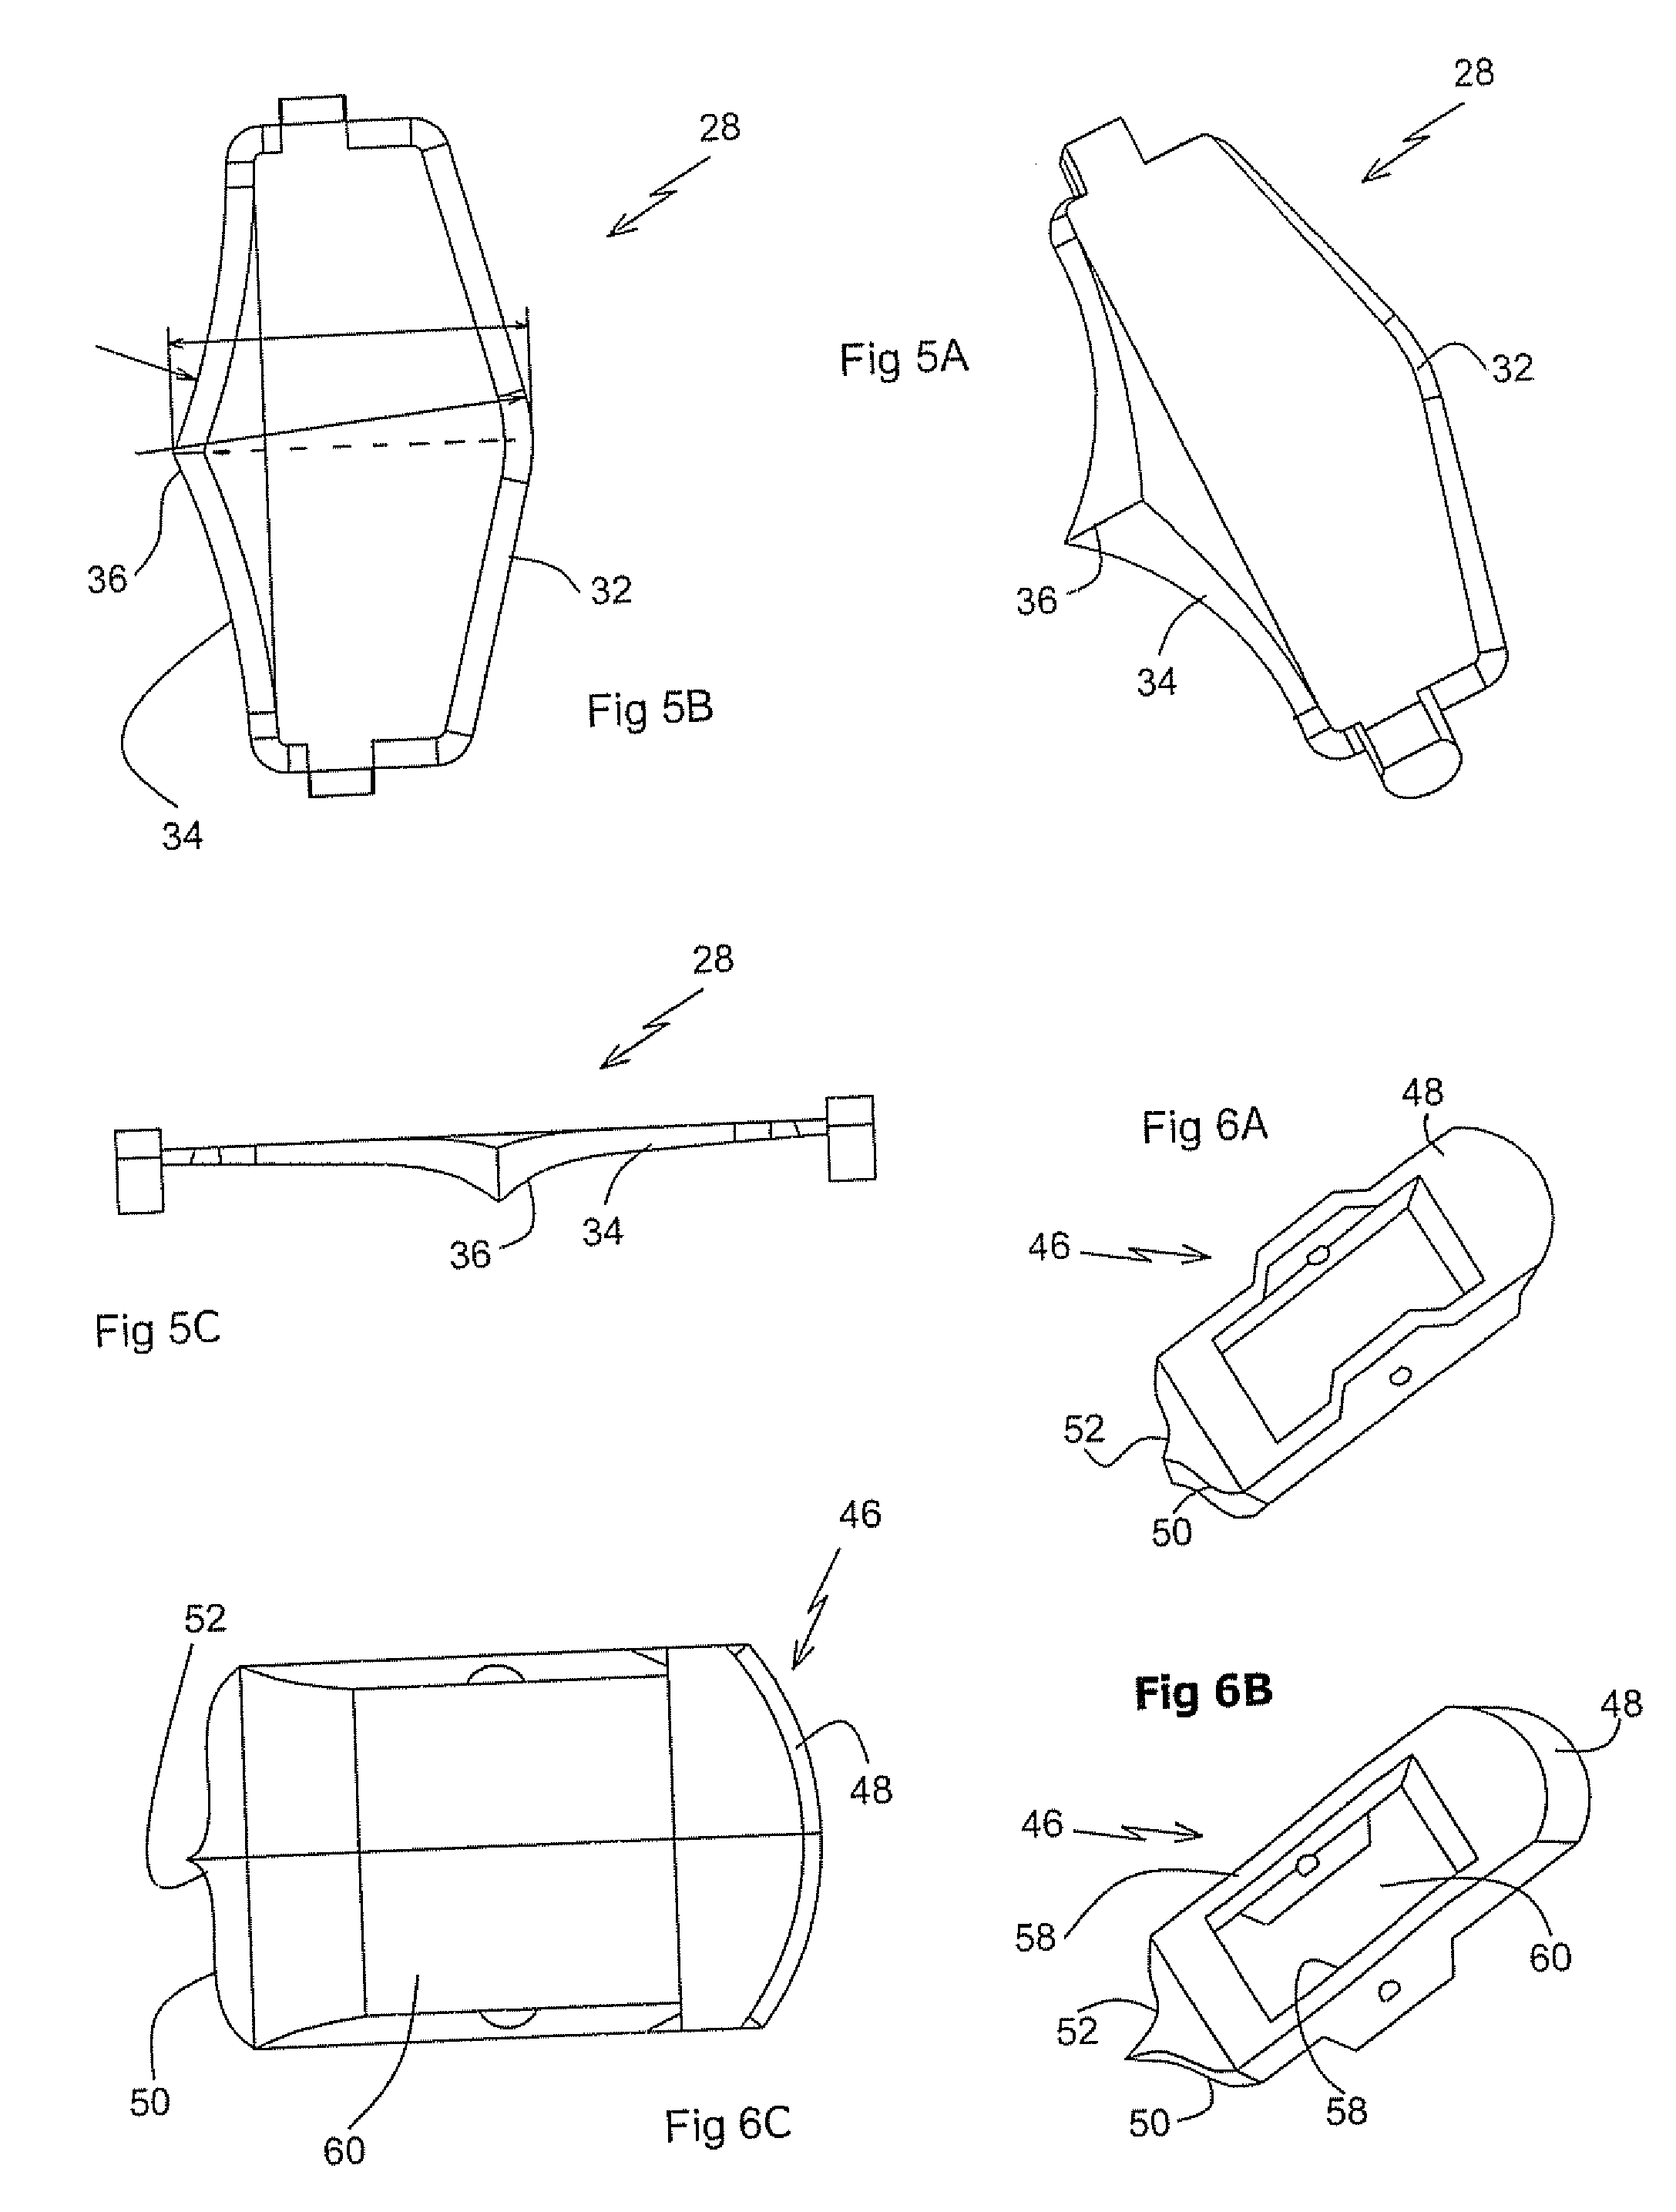 Surgical tool and method for extracting tissue from wall of an organ